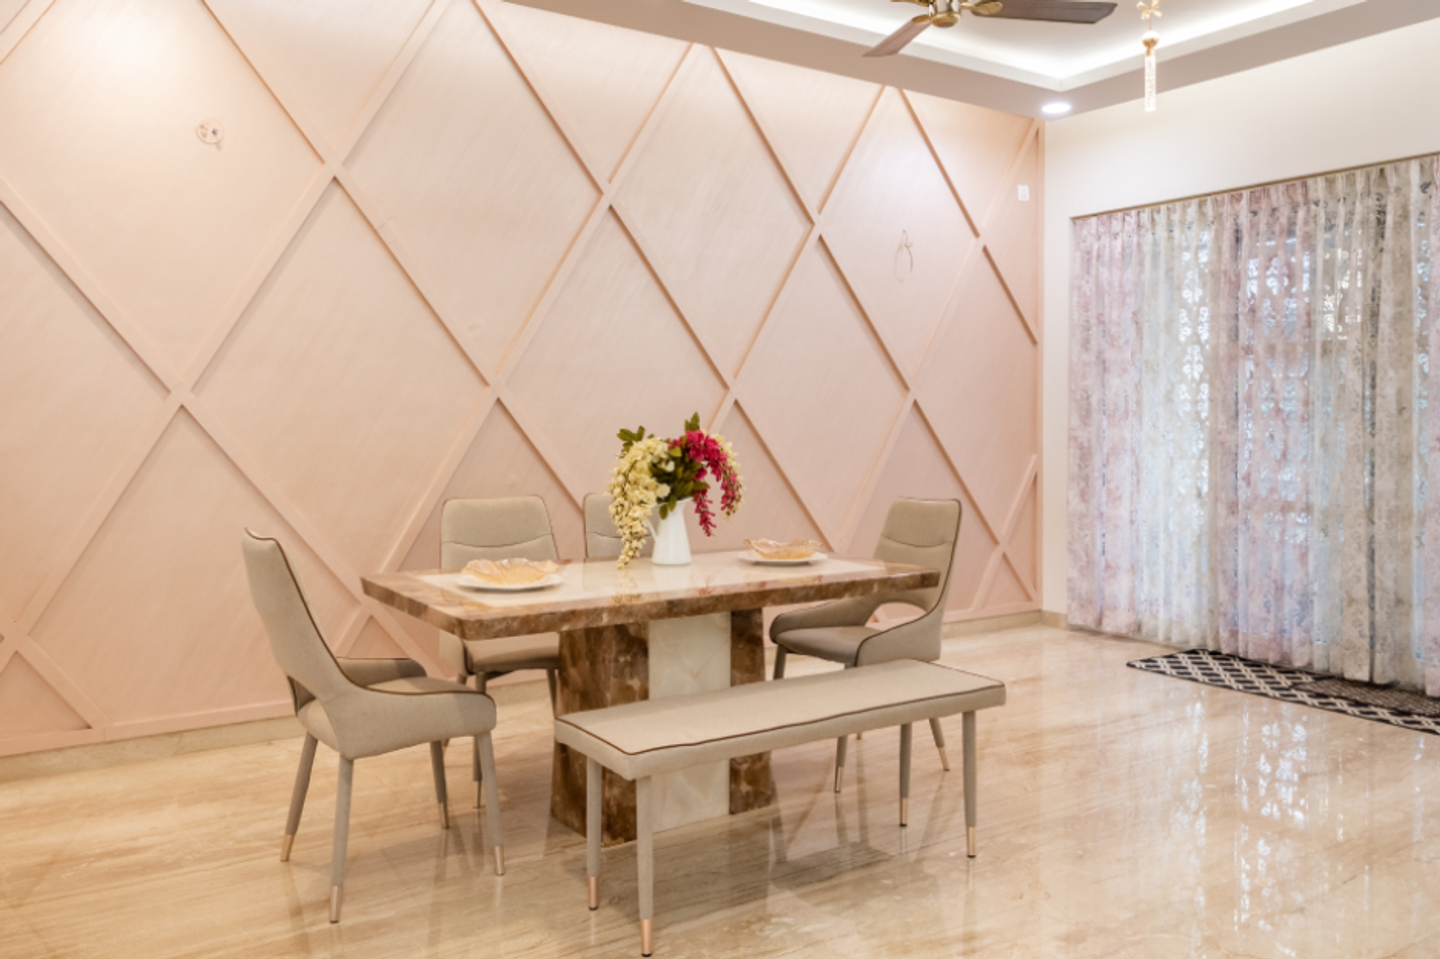 Contemporary Dining Room Design With Geometric Accent Wall